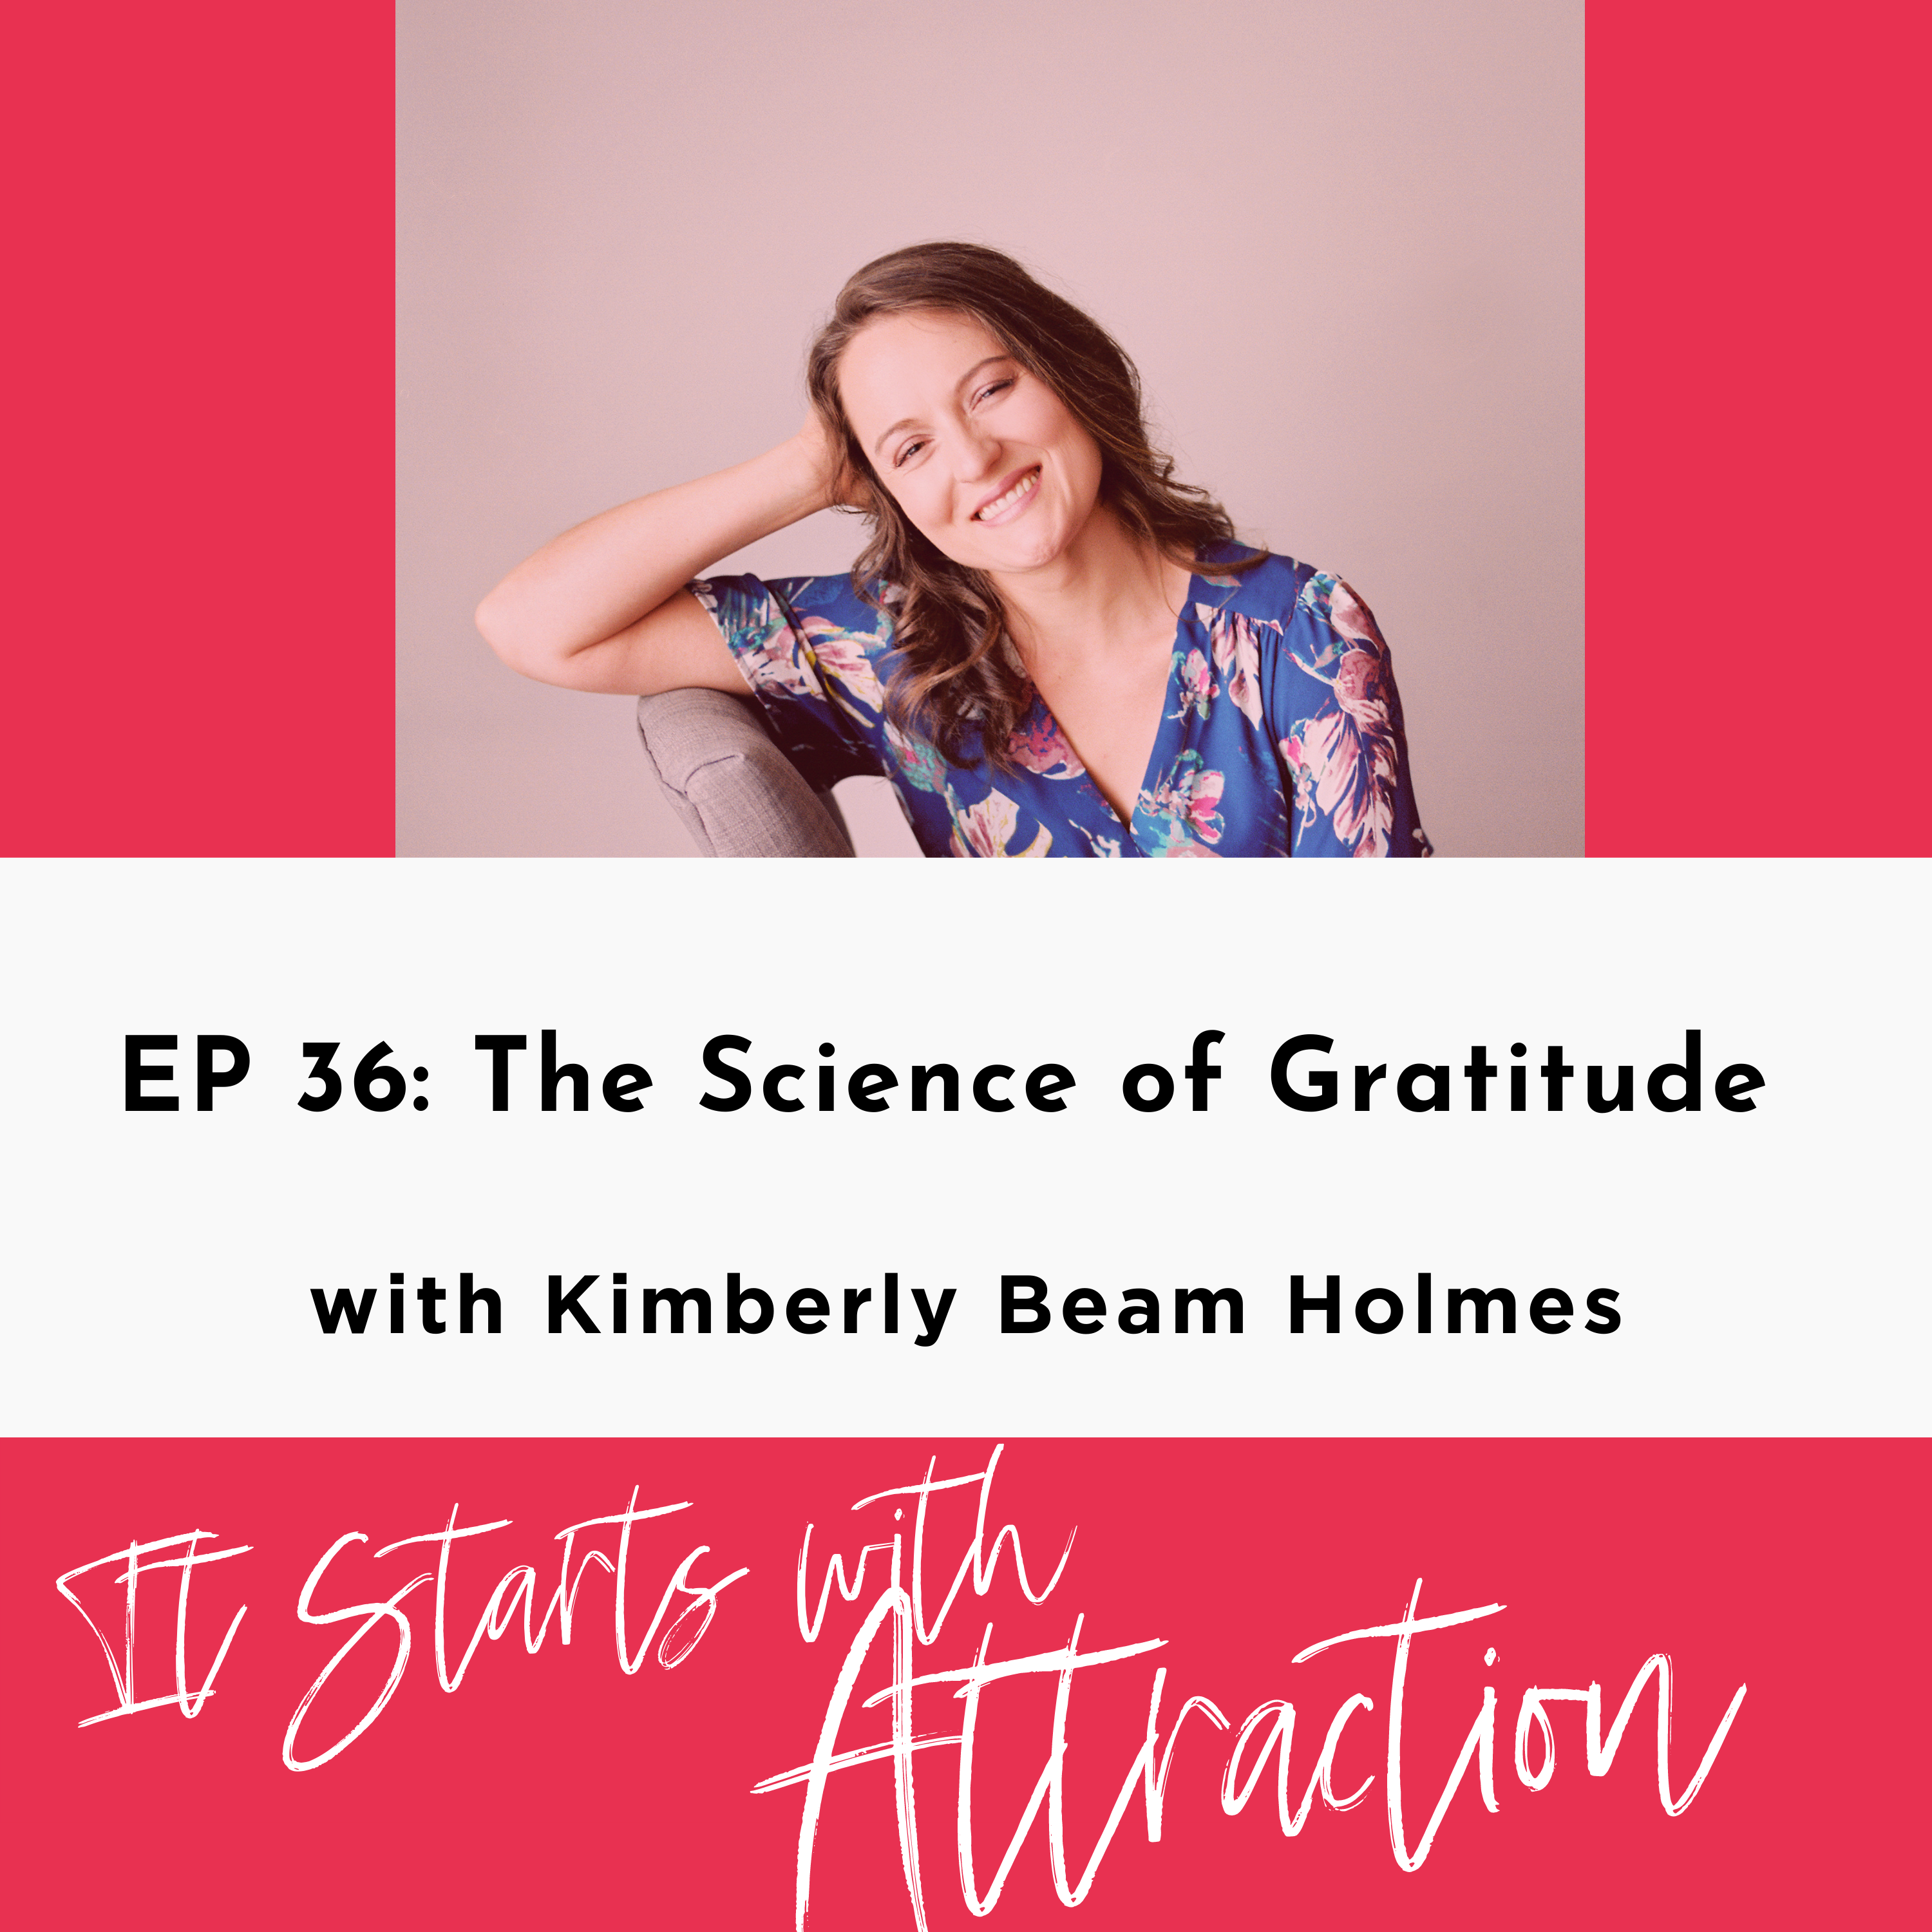 The Science of Gratitude with Kimberly Beam Holmes